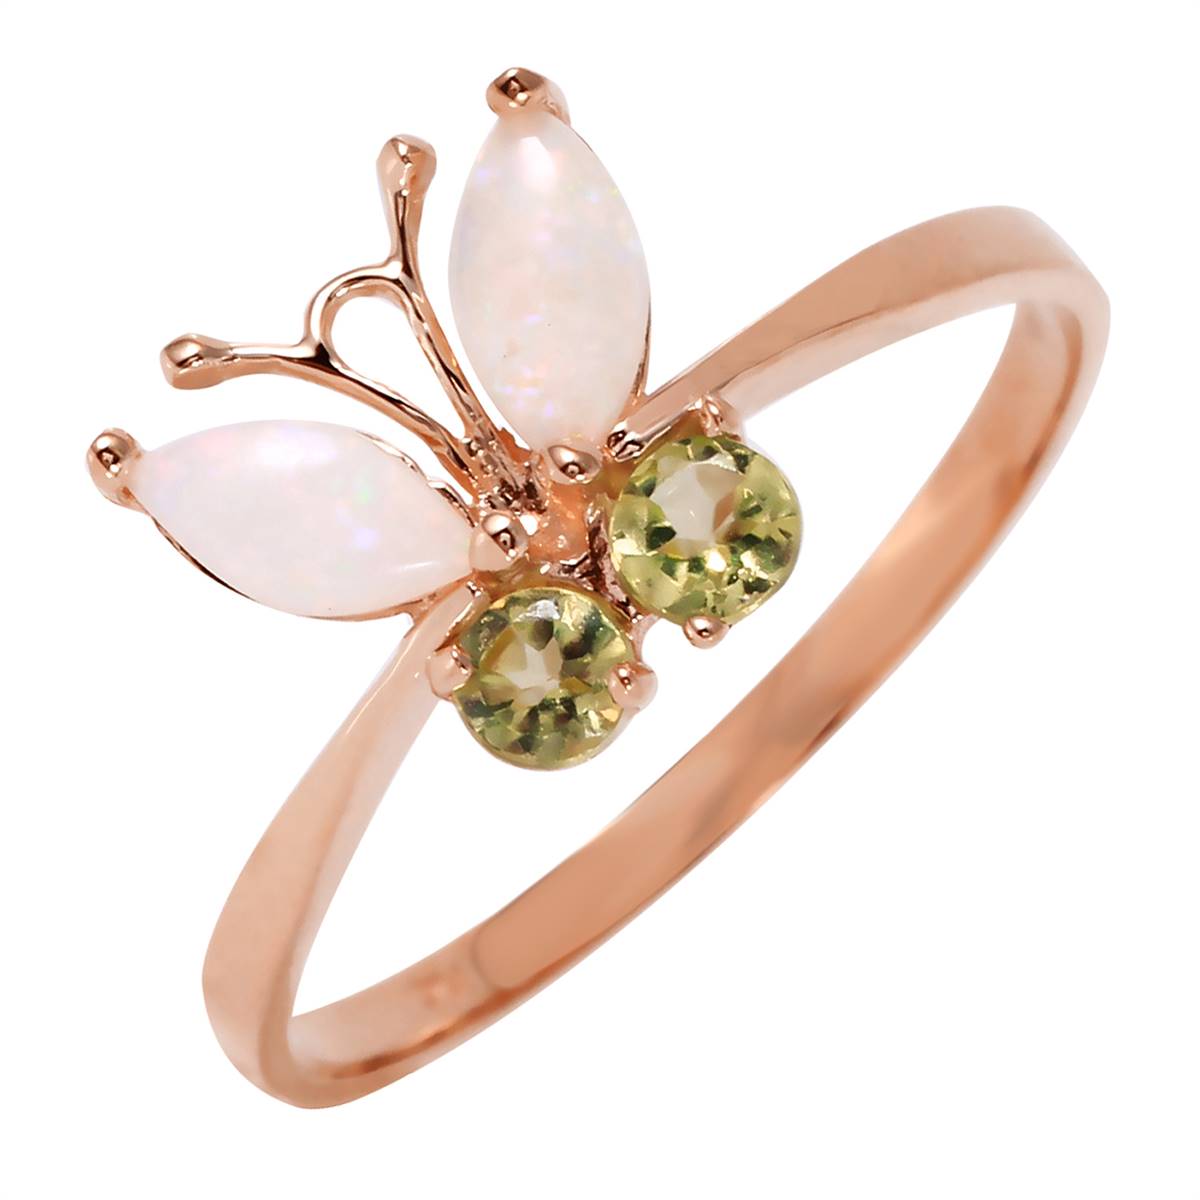 0.7 Carat 14K Solid Rose Gold Butterfly Ring Opal Peridot